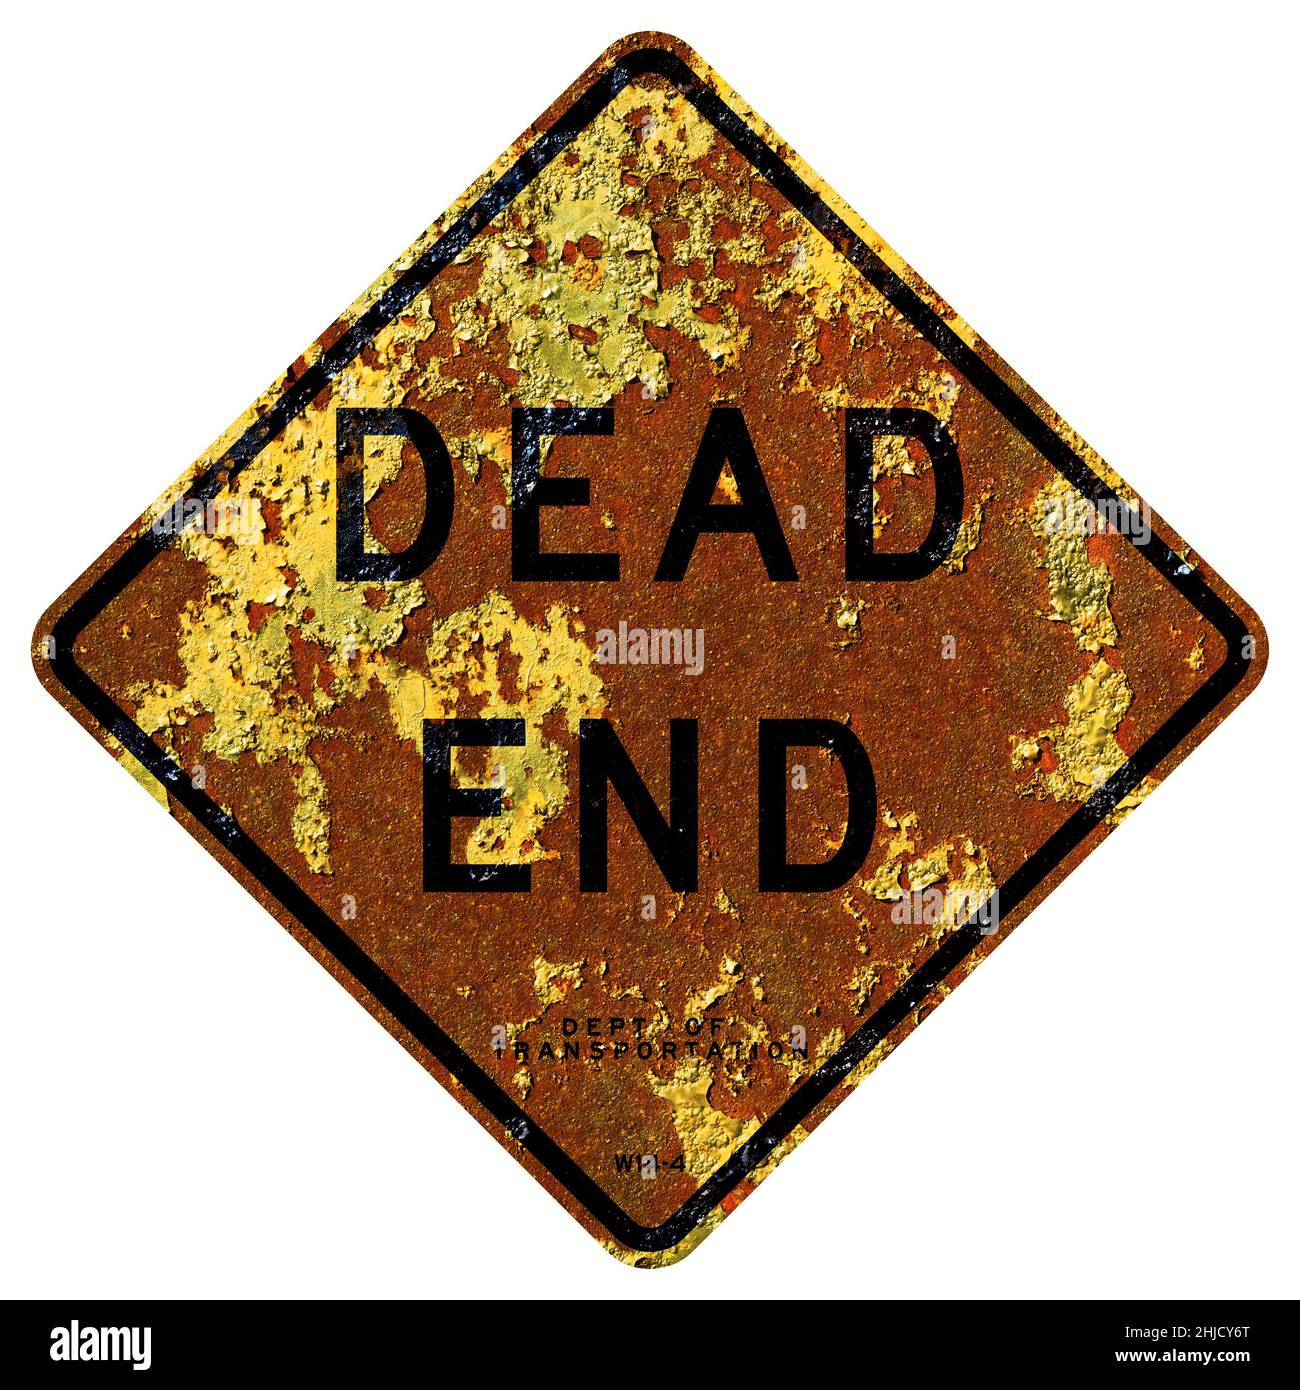 Old rusty American road sign - Dead End, New York City Stock Photo